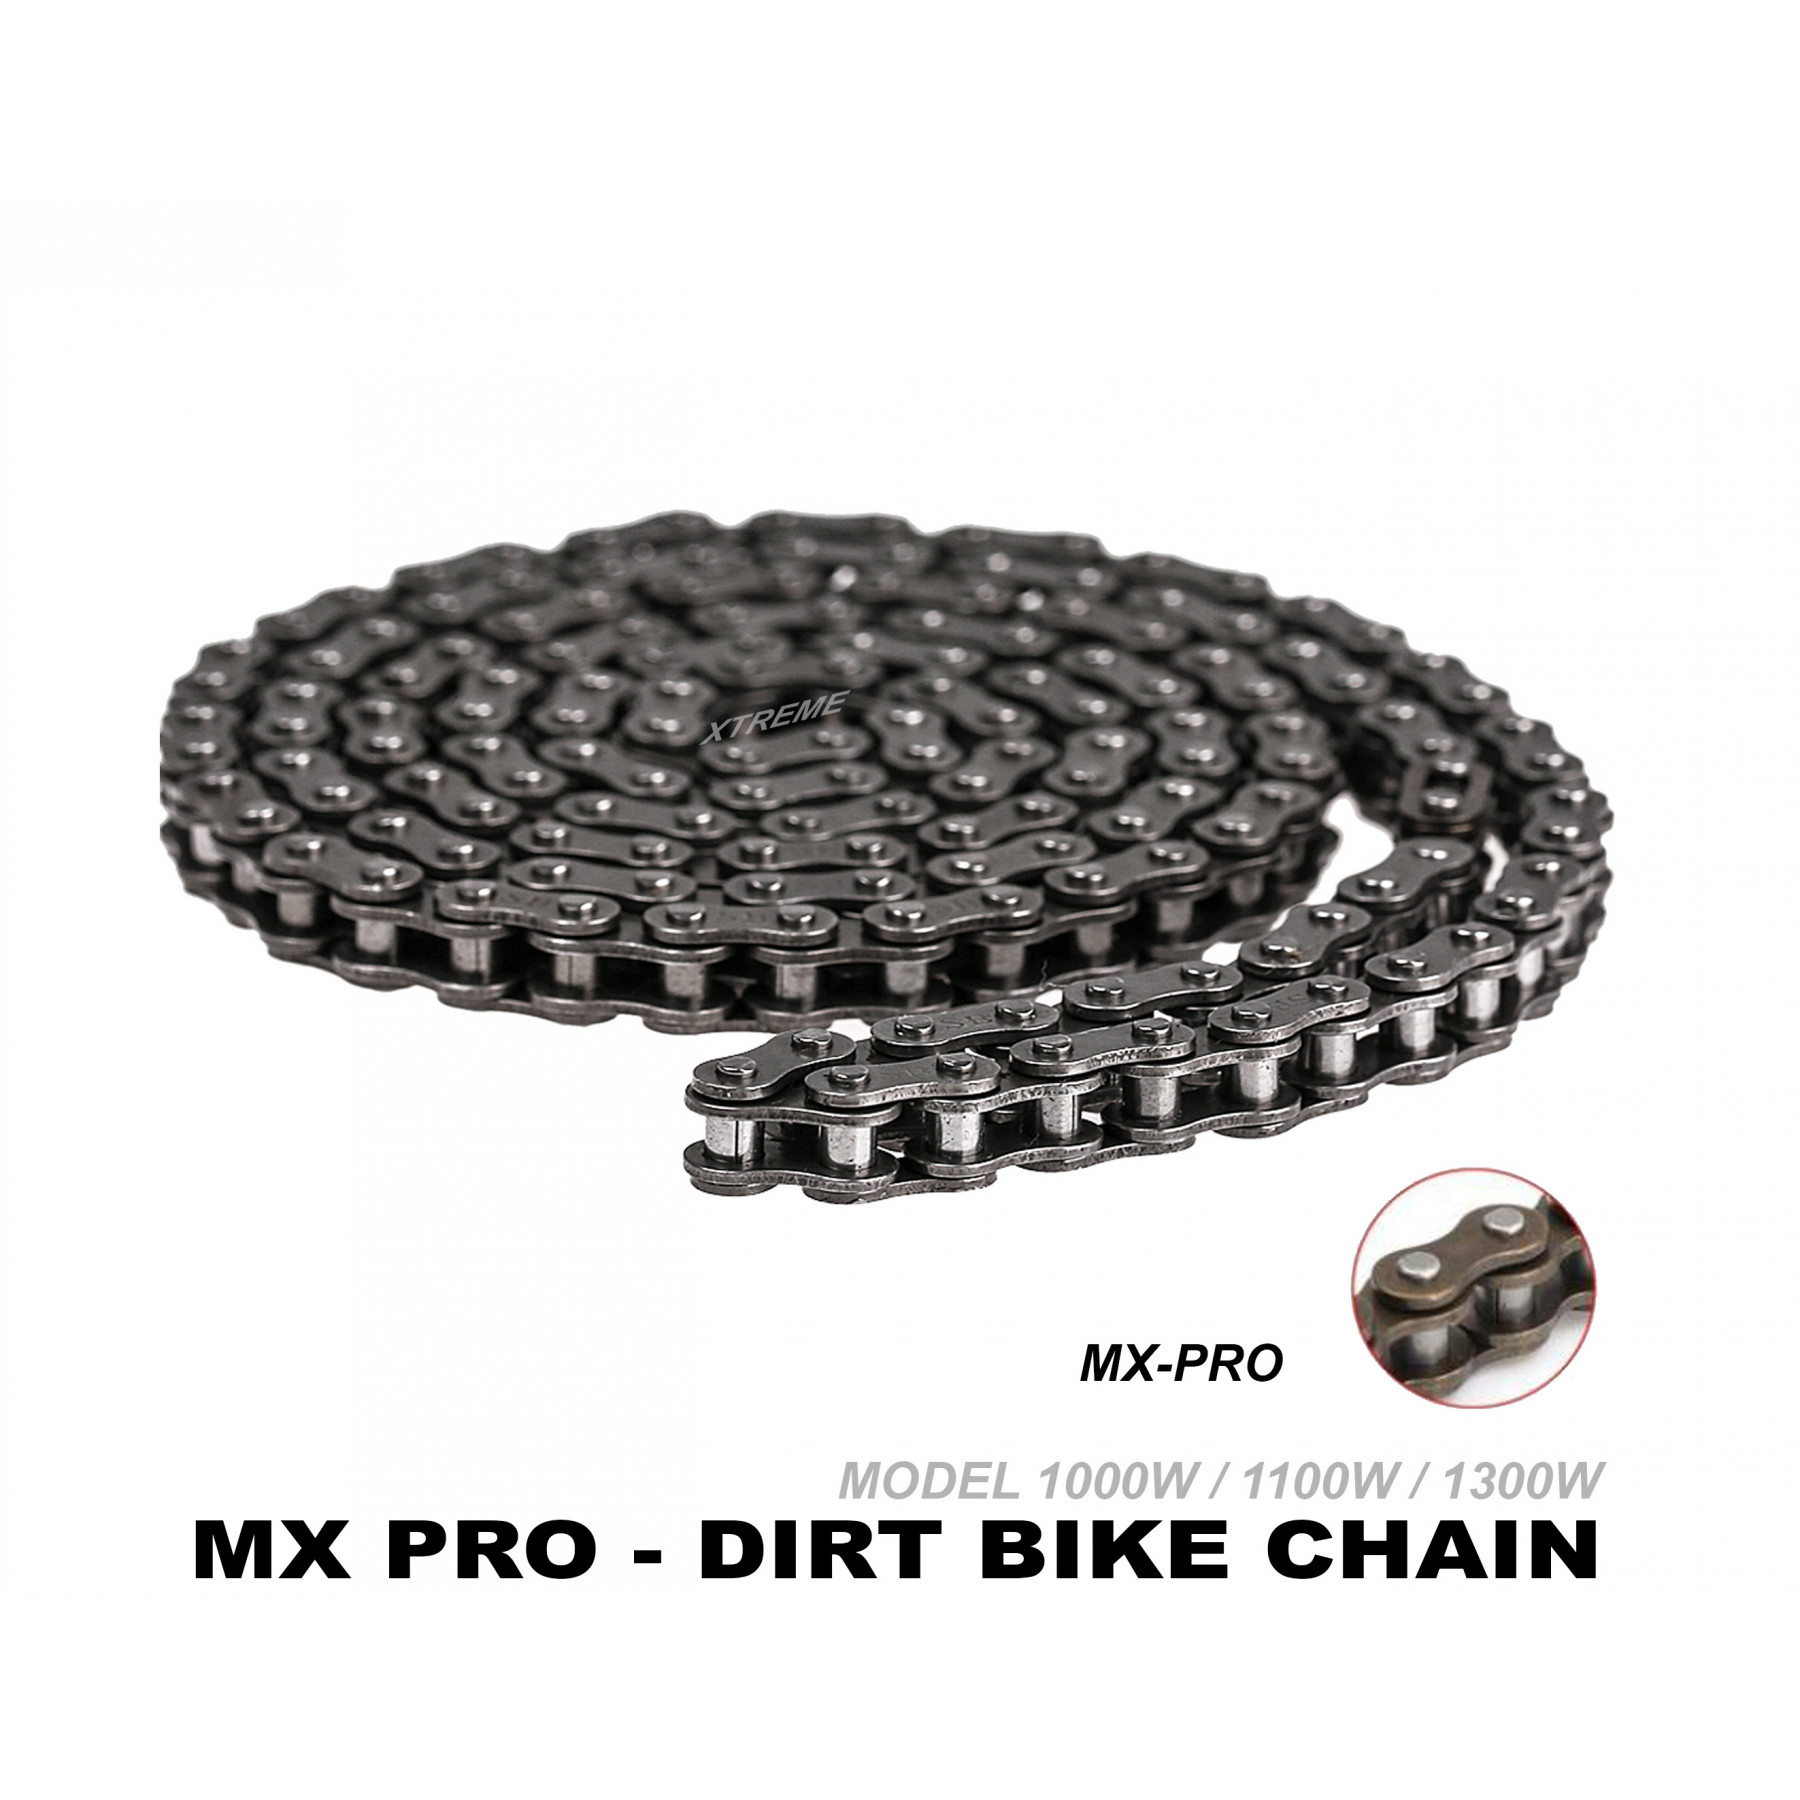 XTREME ELECTRIC XTM MX-PRO 48V REPLACEMENT CHAIN 219H-116 LINKS